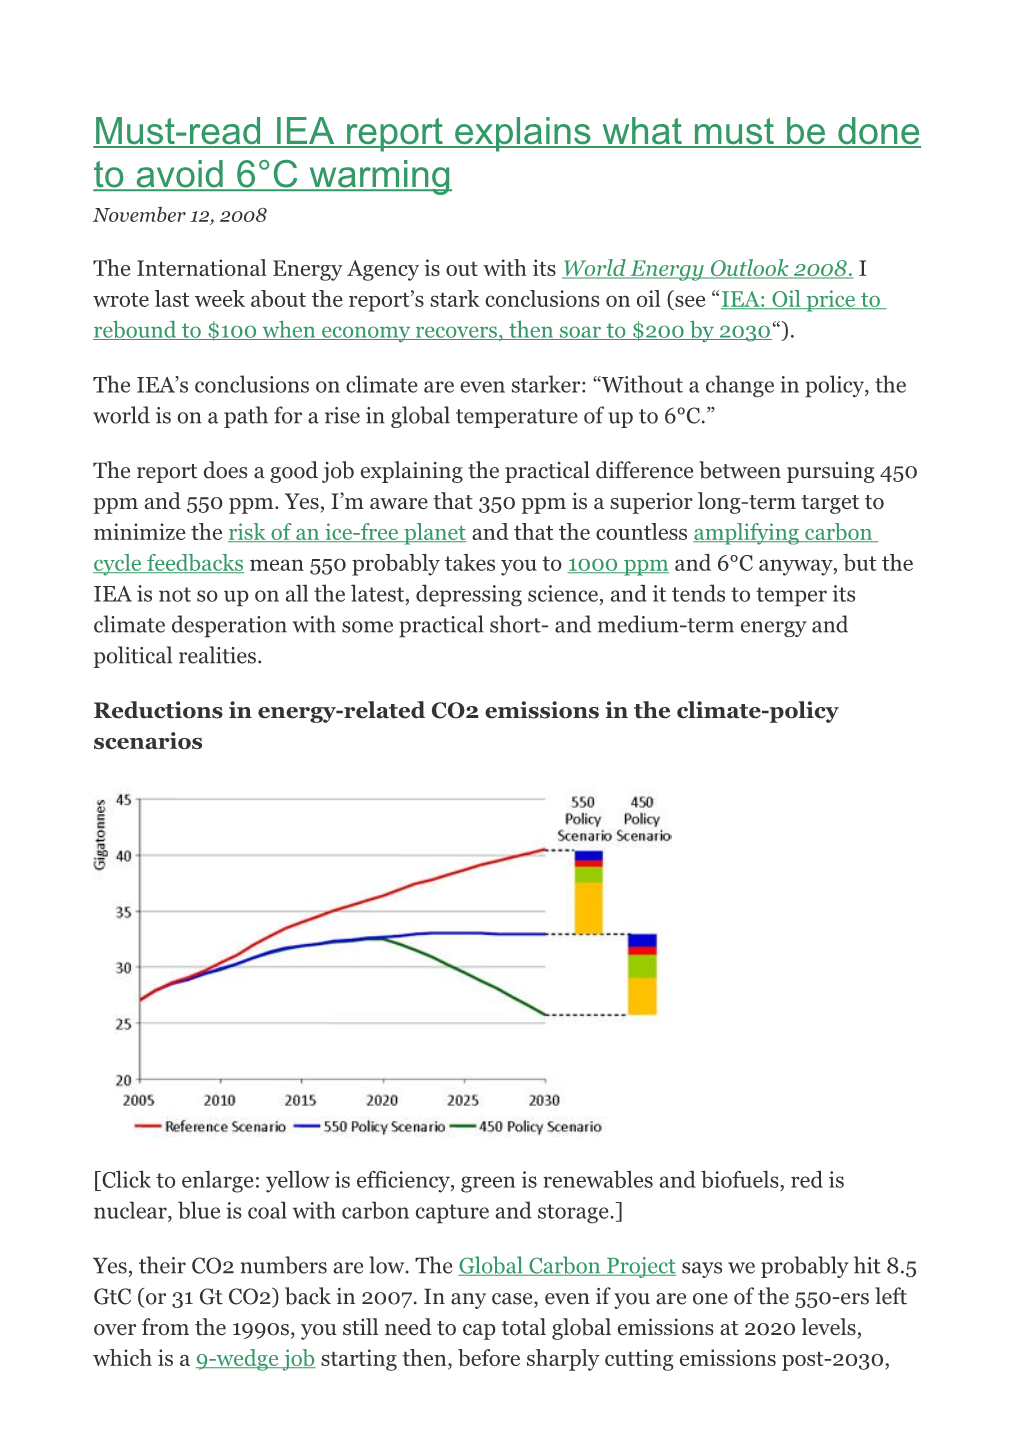 Must-Read IEA Report Explains What Must Be Done to Avoid 6 C Warming